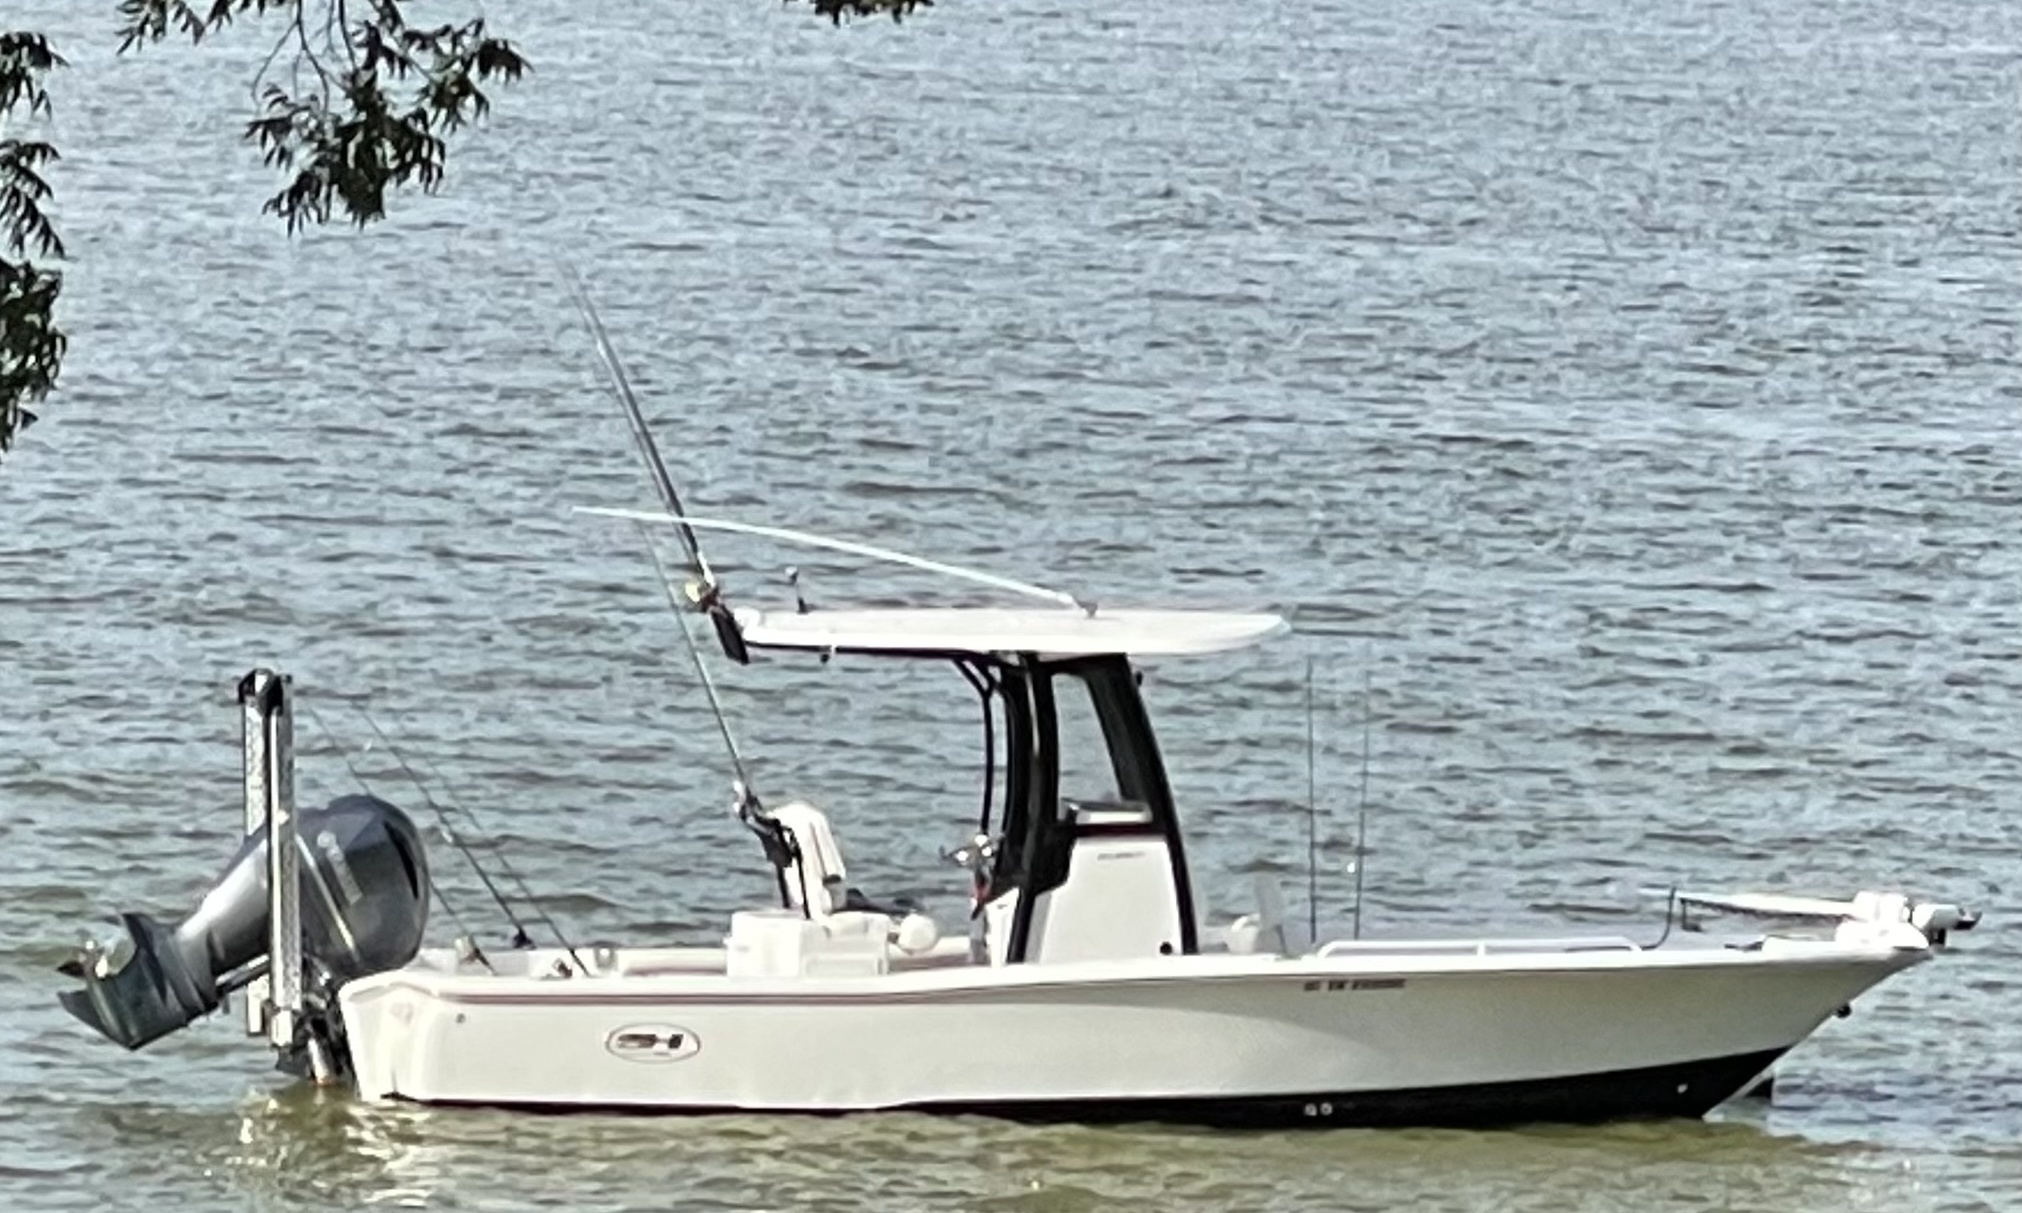 25' Center Console Boat for rent on Lake Lewisville